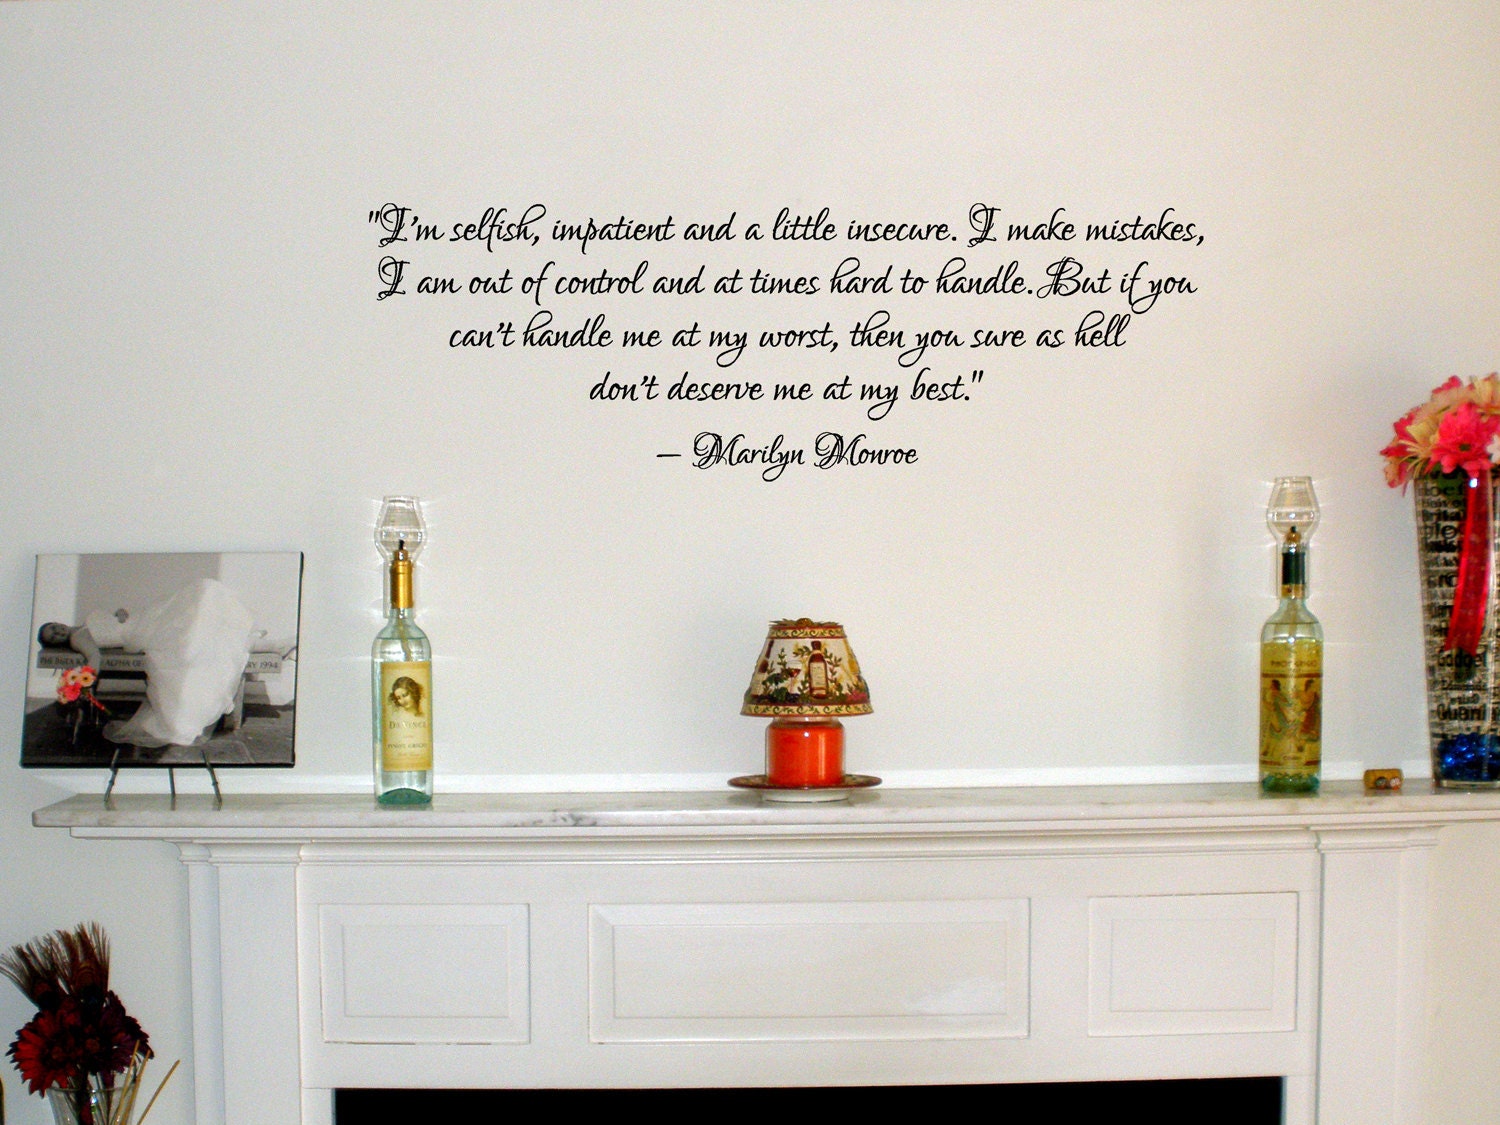 Marilyn Monroe quote removable